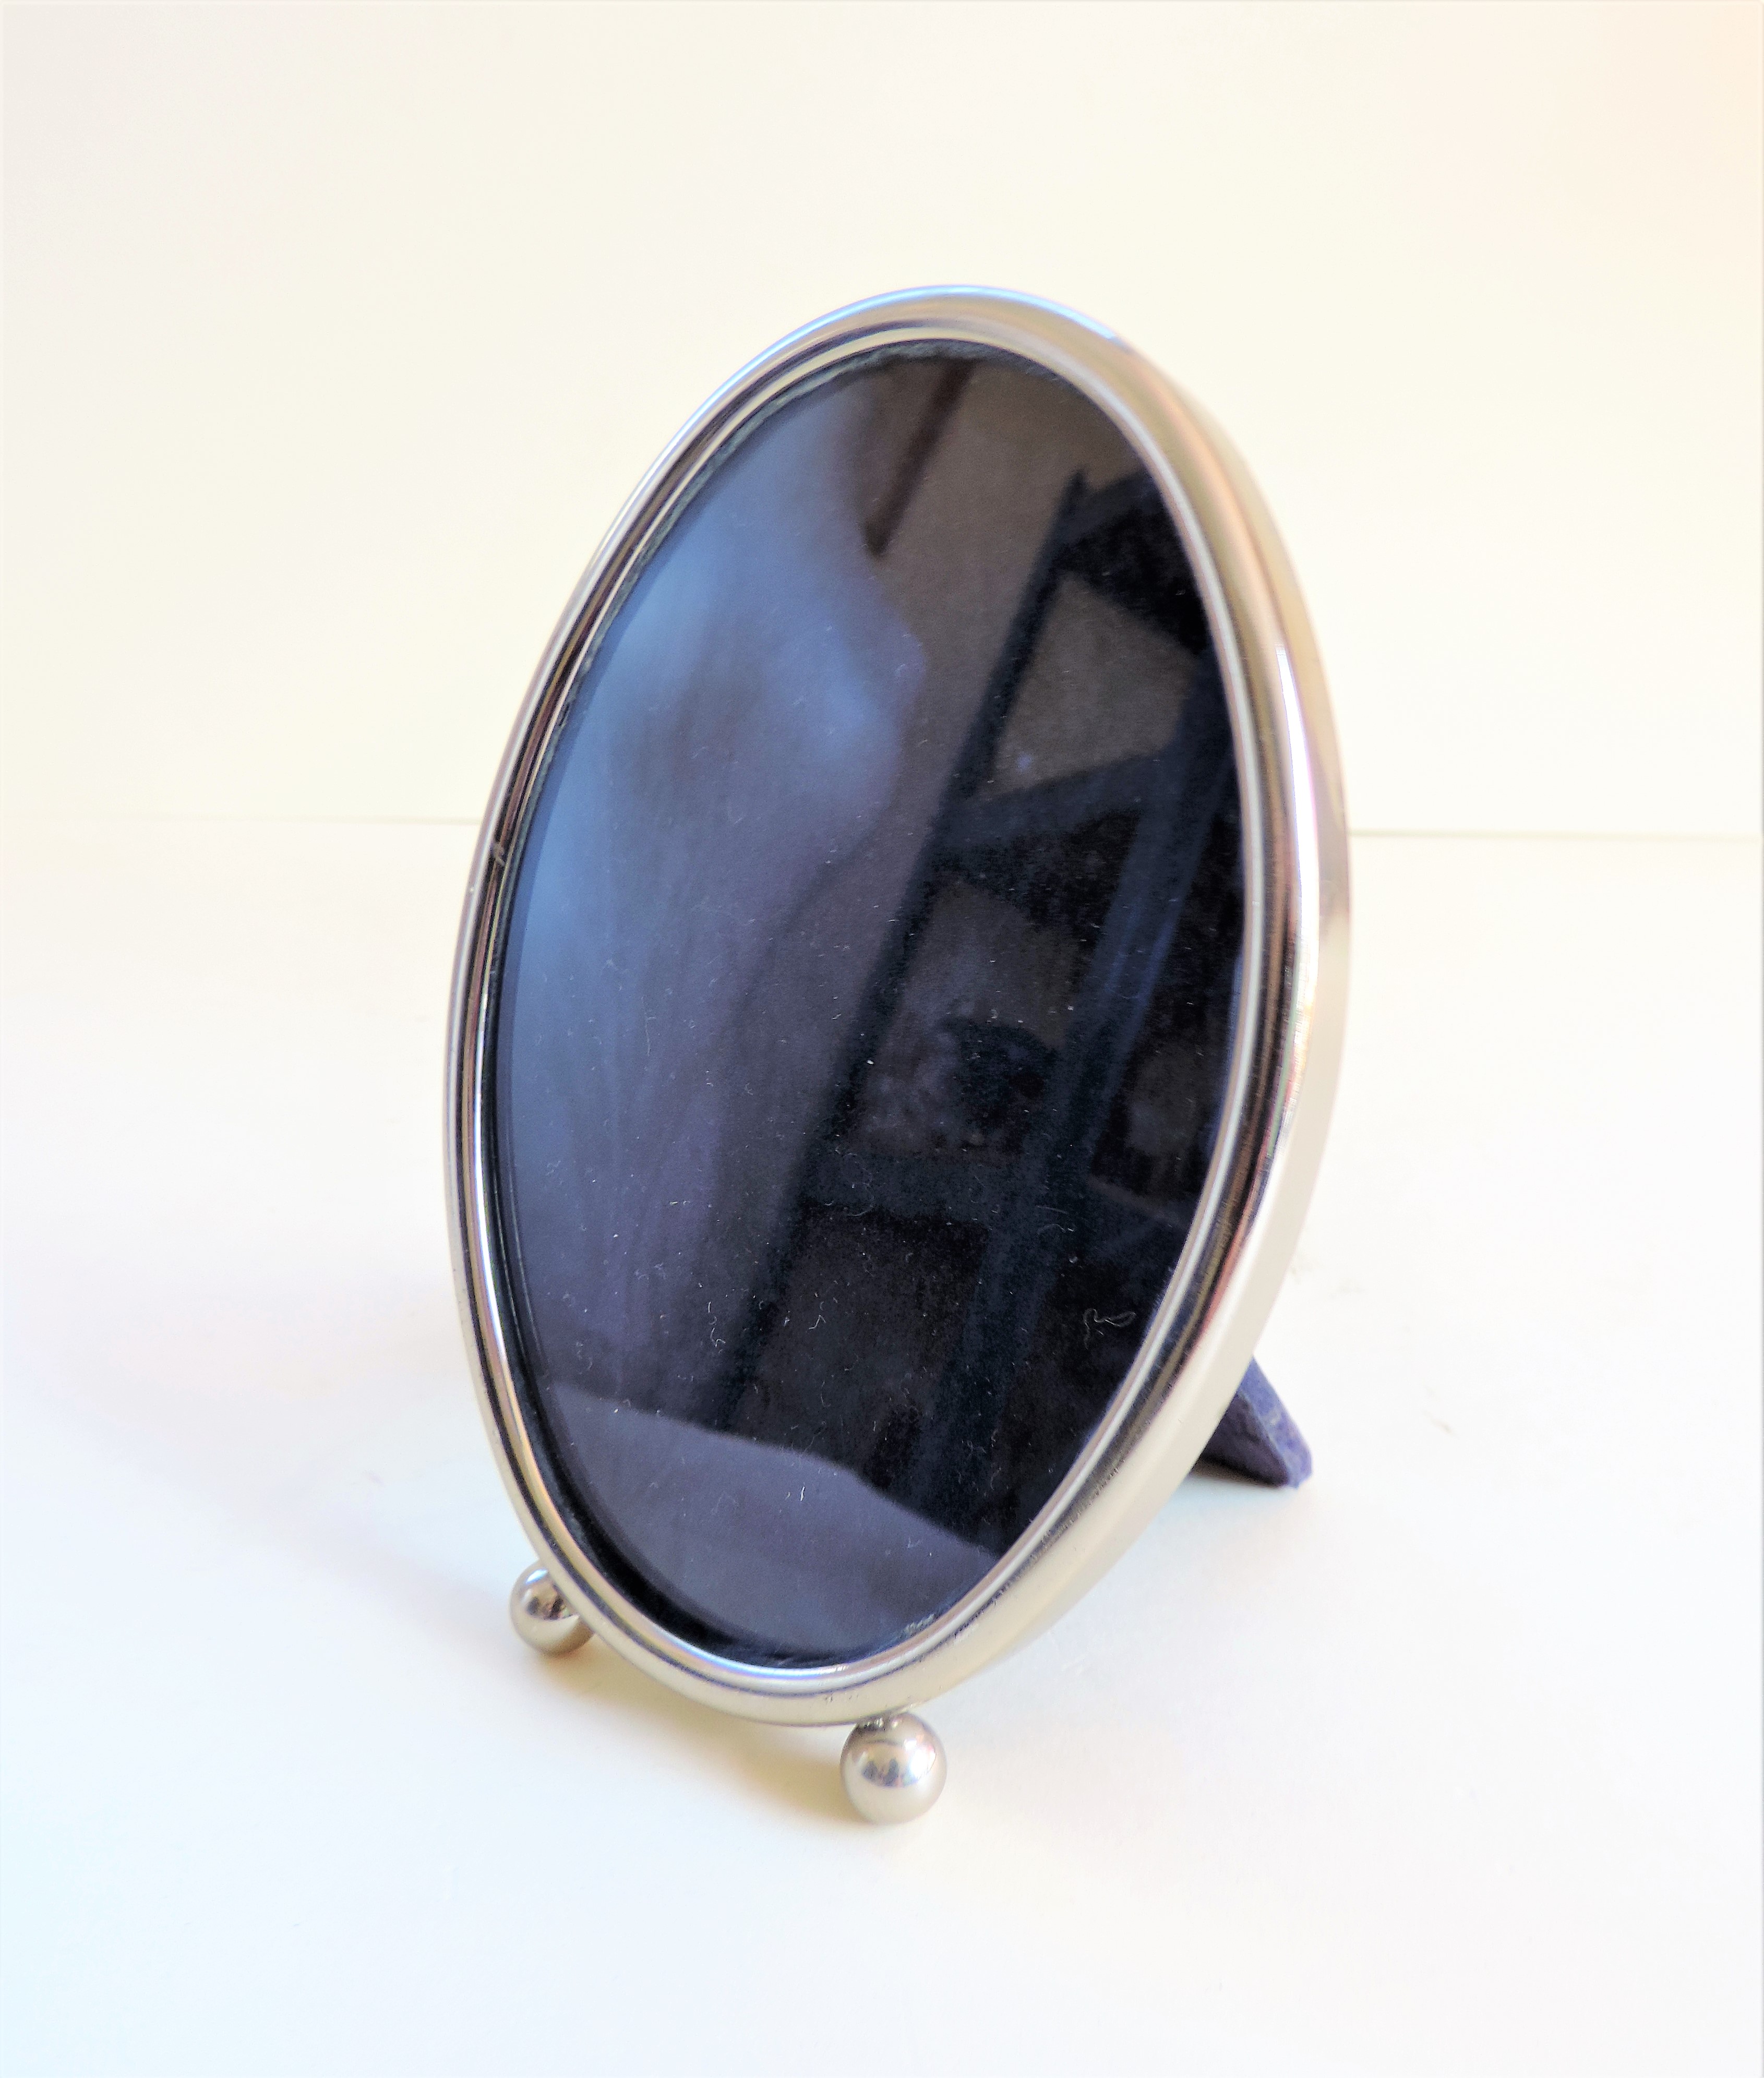 Vintage Silver Plated Oval Photo Frame - Image 2 of 2